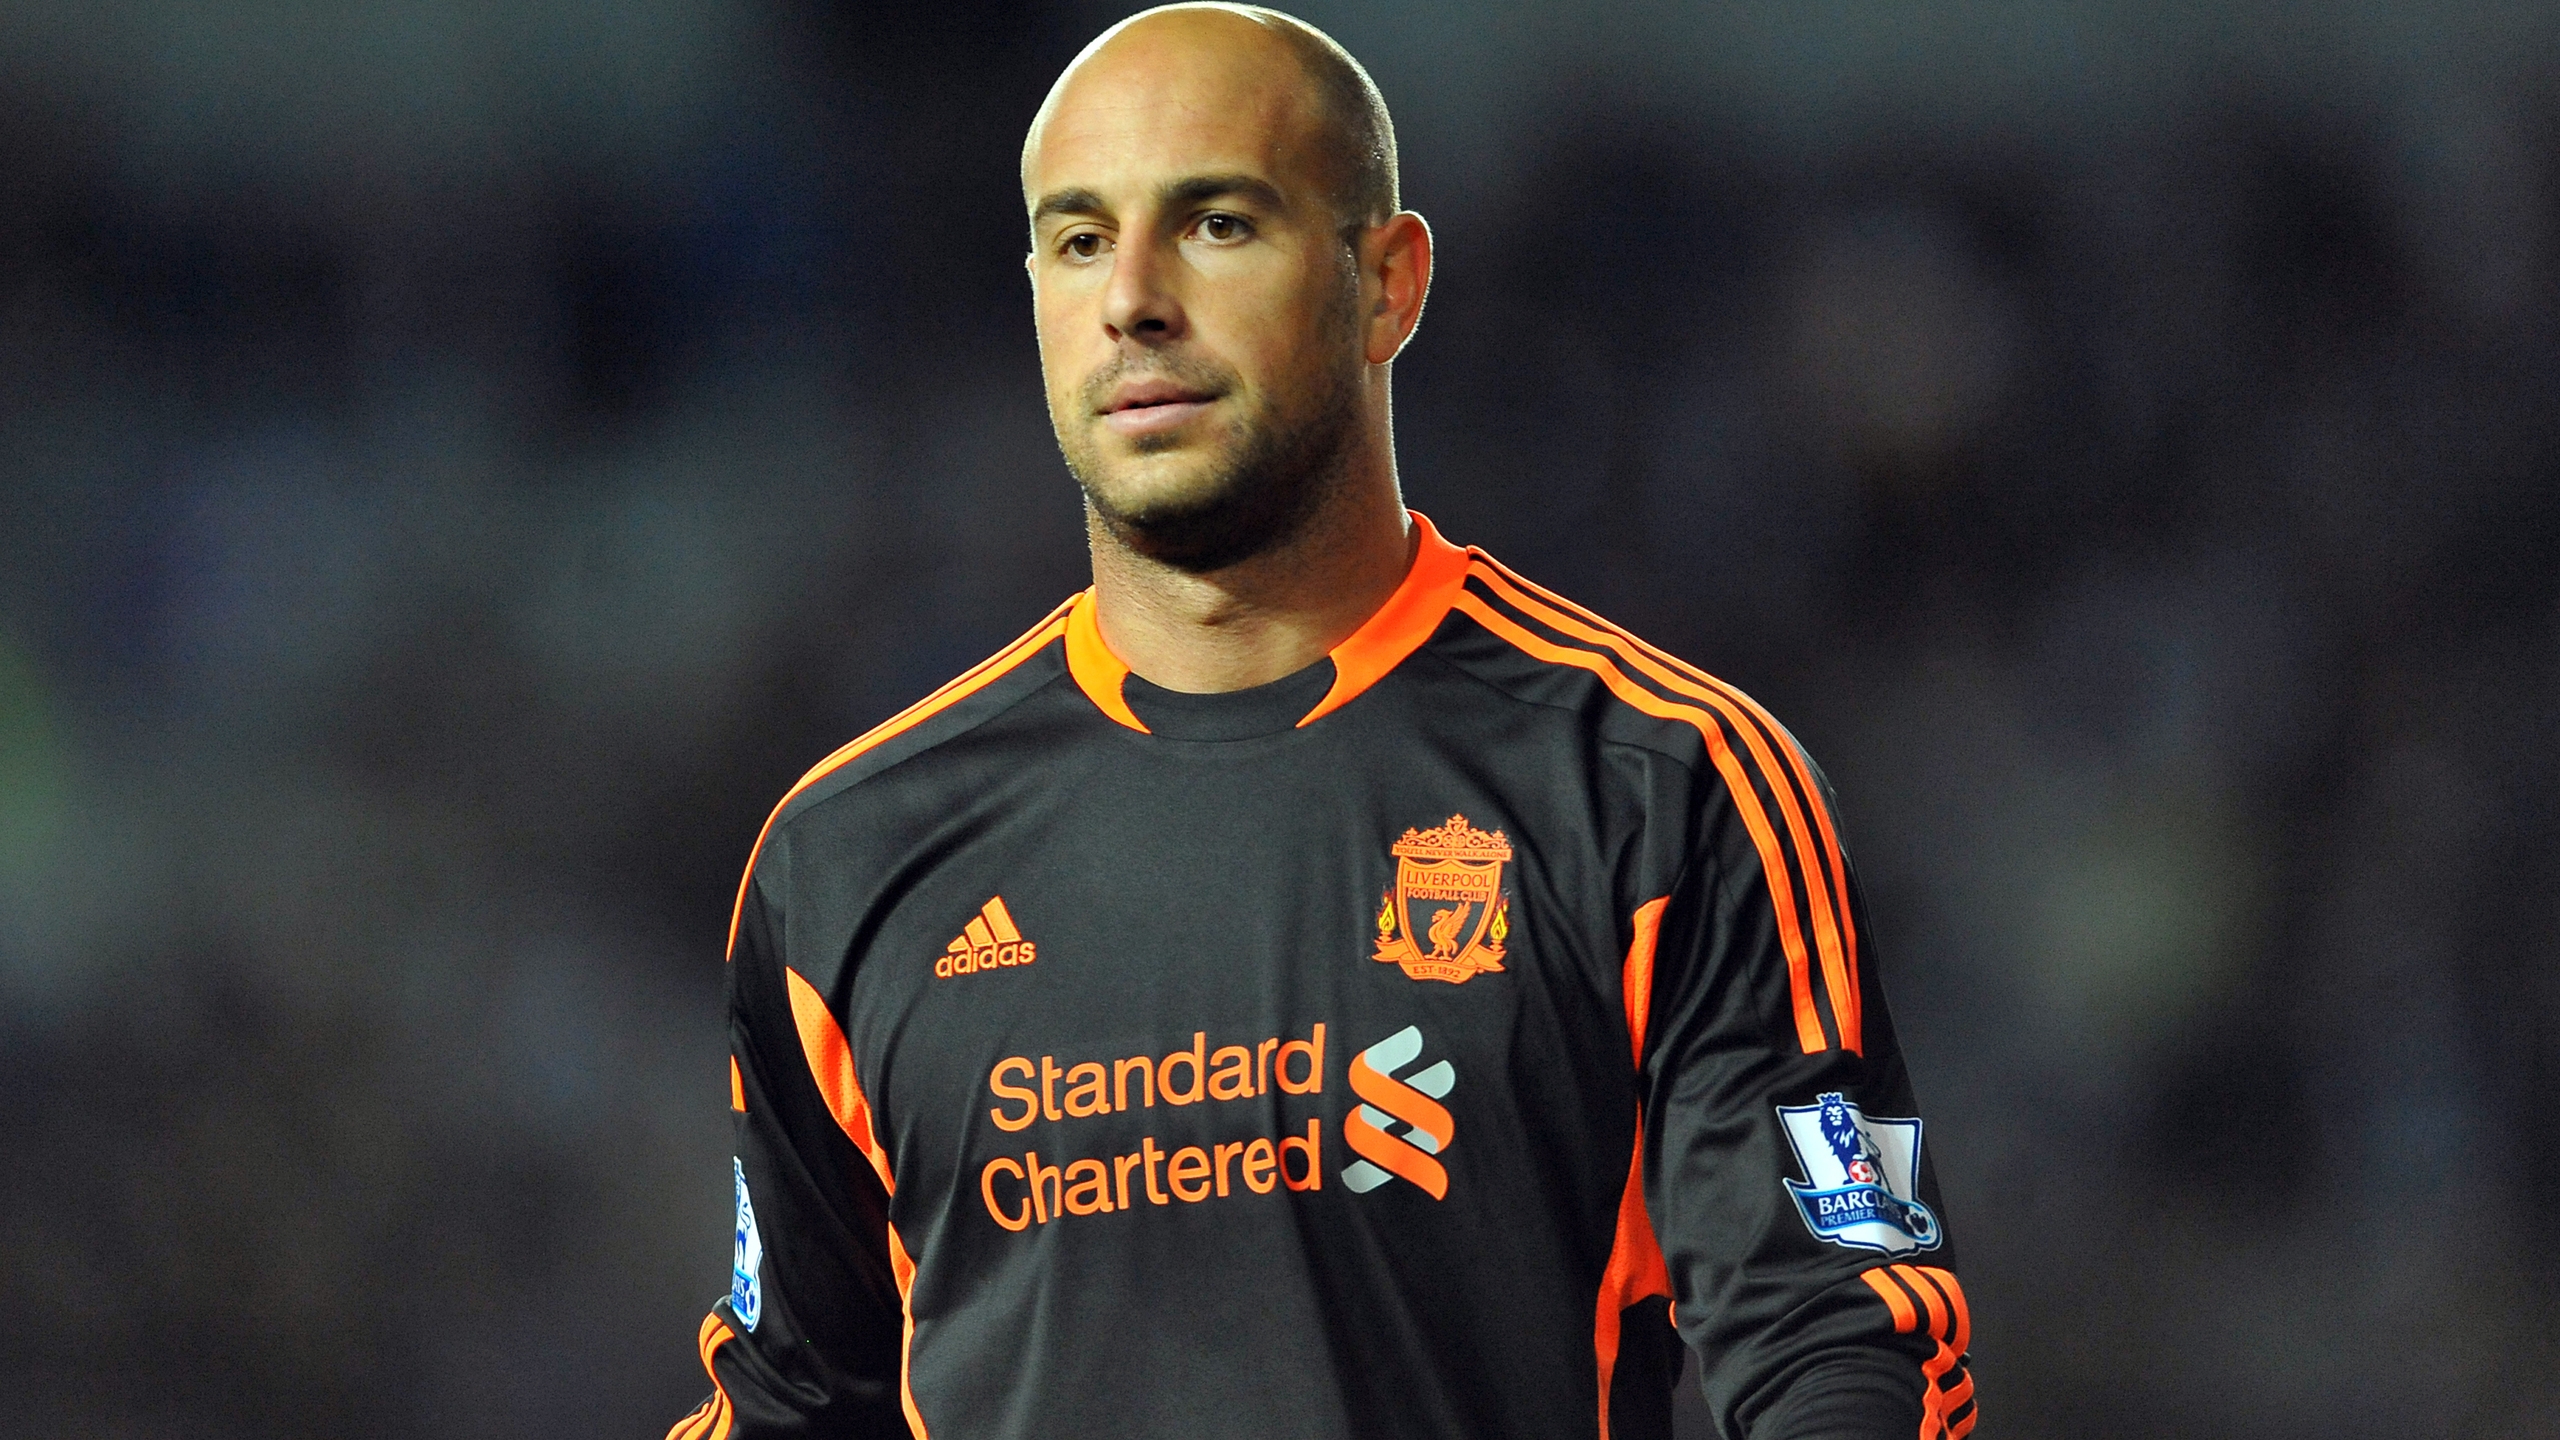 Pepe Reina Liverpool for 2560x1440 HDTV resolution